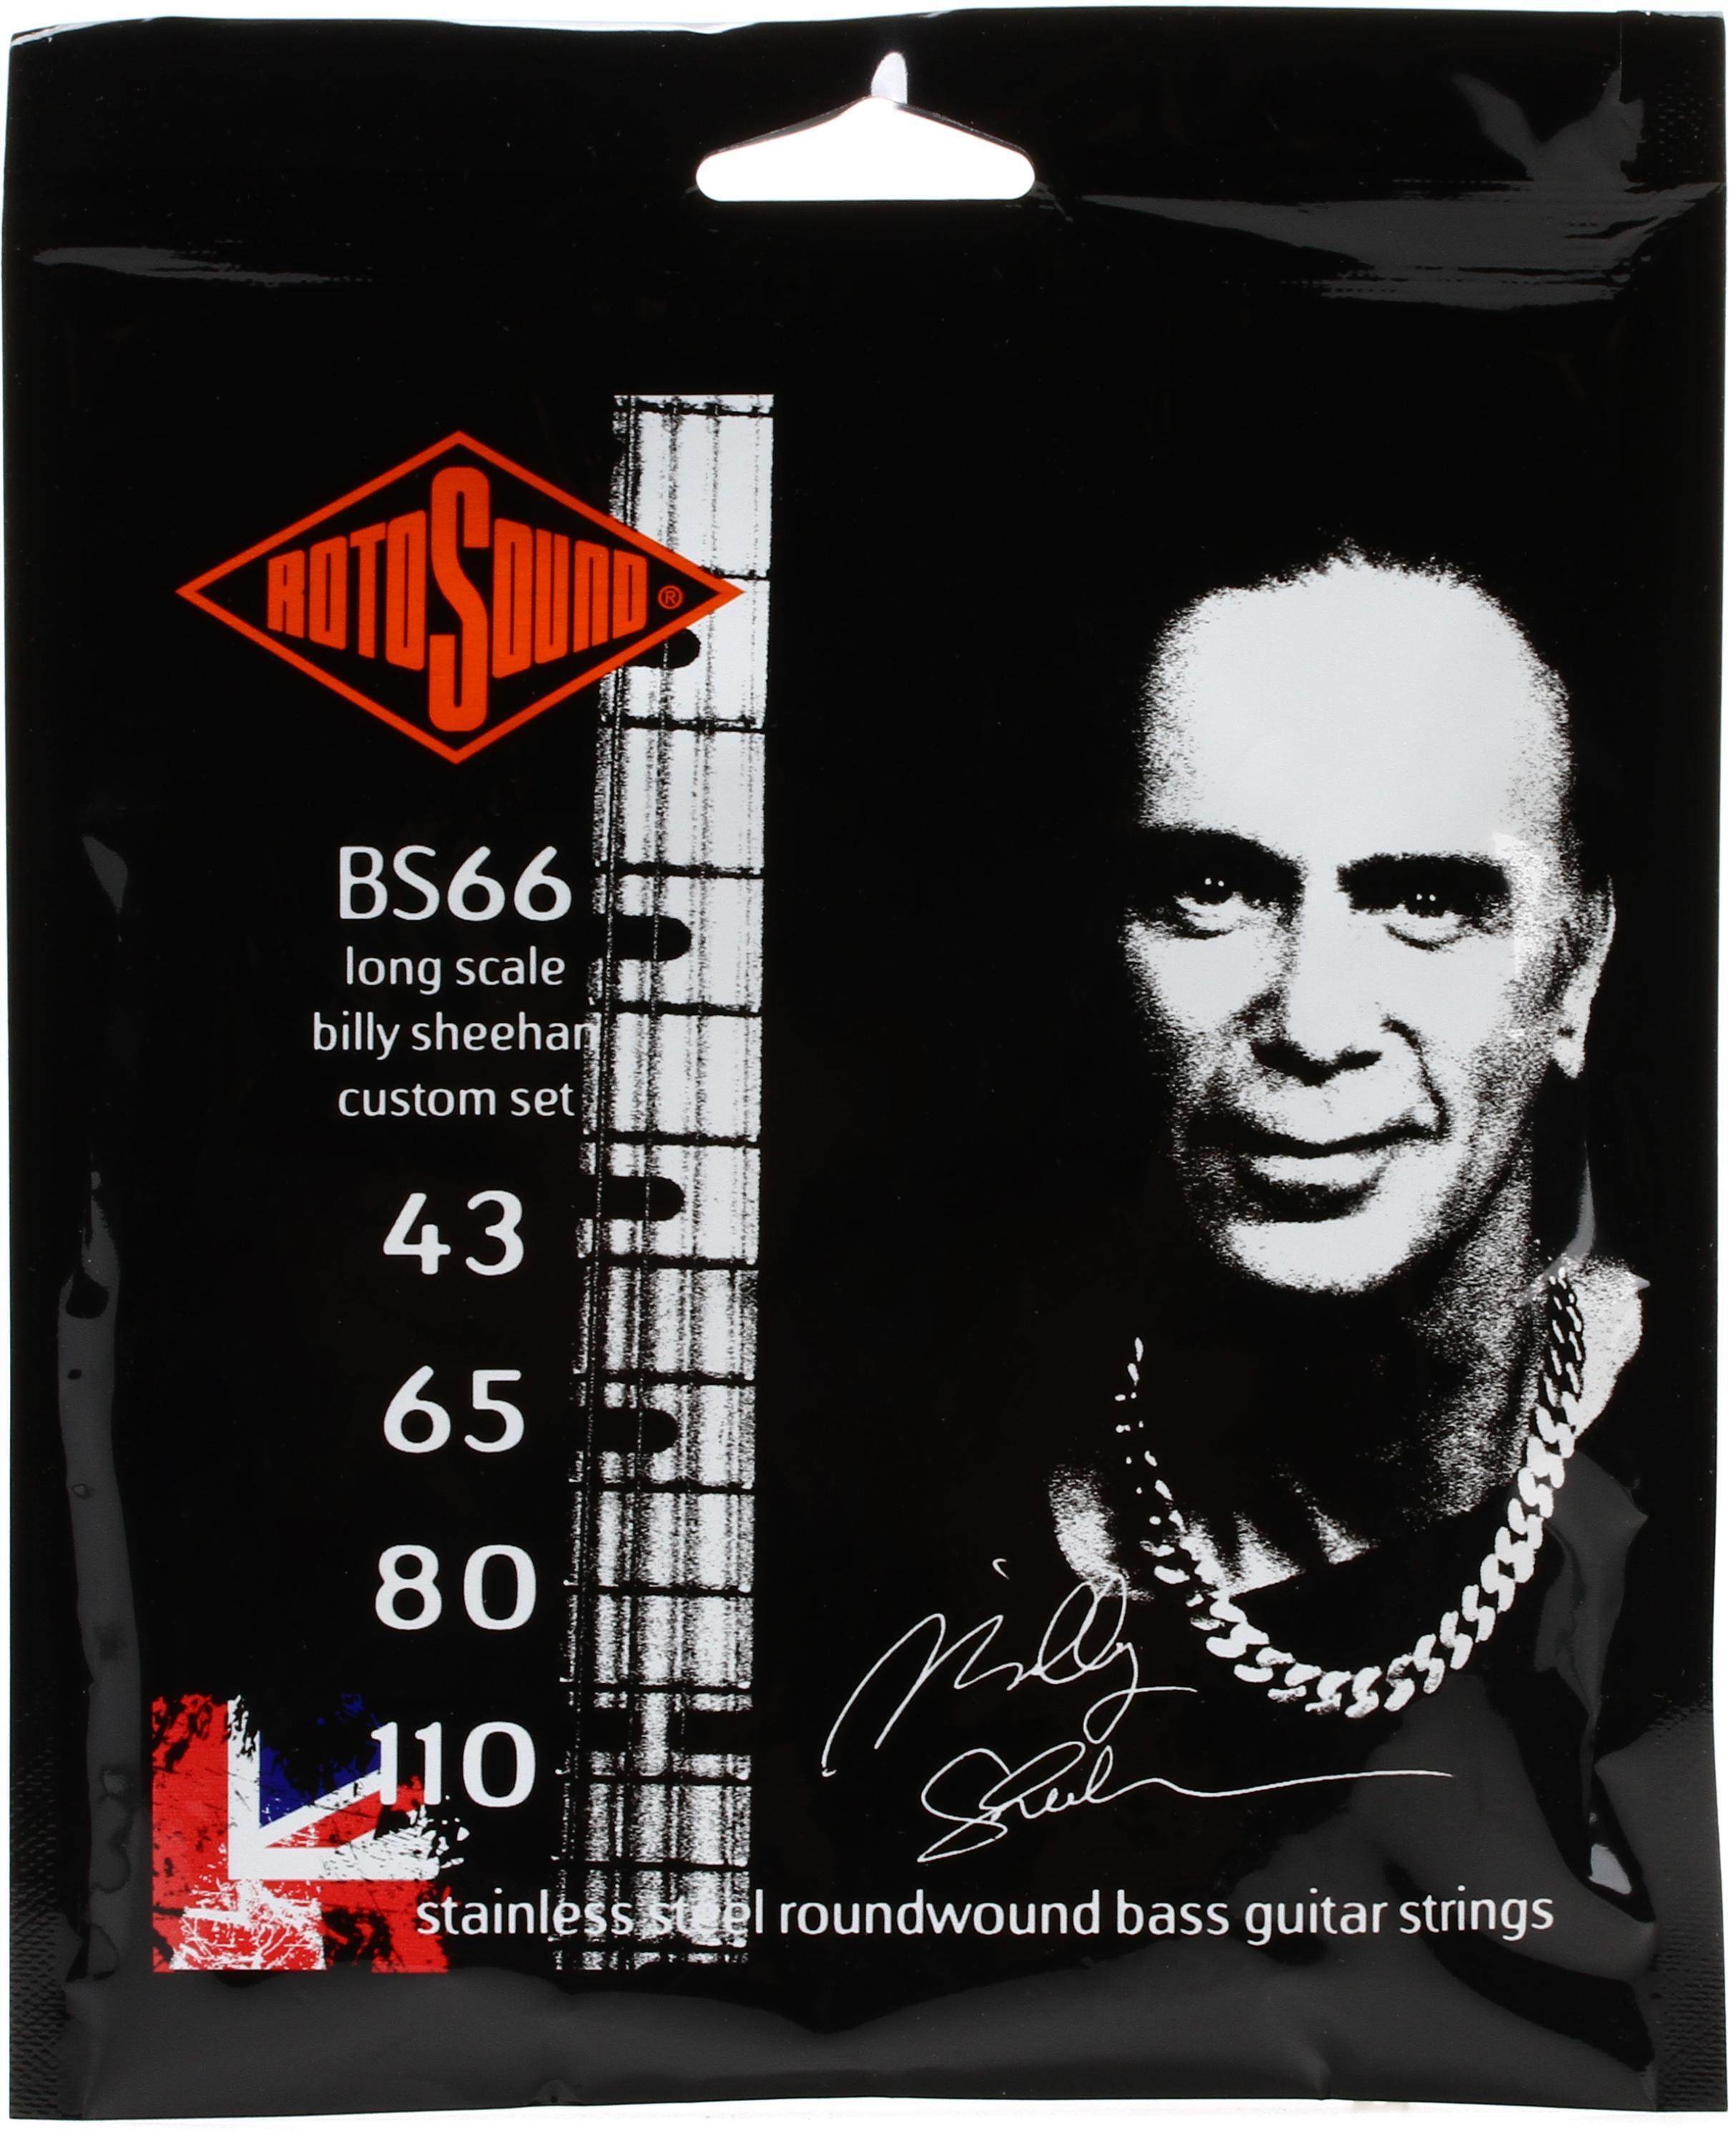 Rotosound BS66 Swing Bass 66 Billy Sheehan Custom Stainless Steel  Roundwound Bass Guitar Strings - .043-.110 Medium Long Scale 4-string